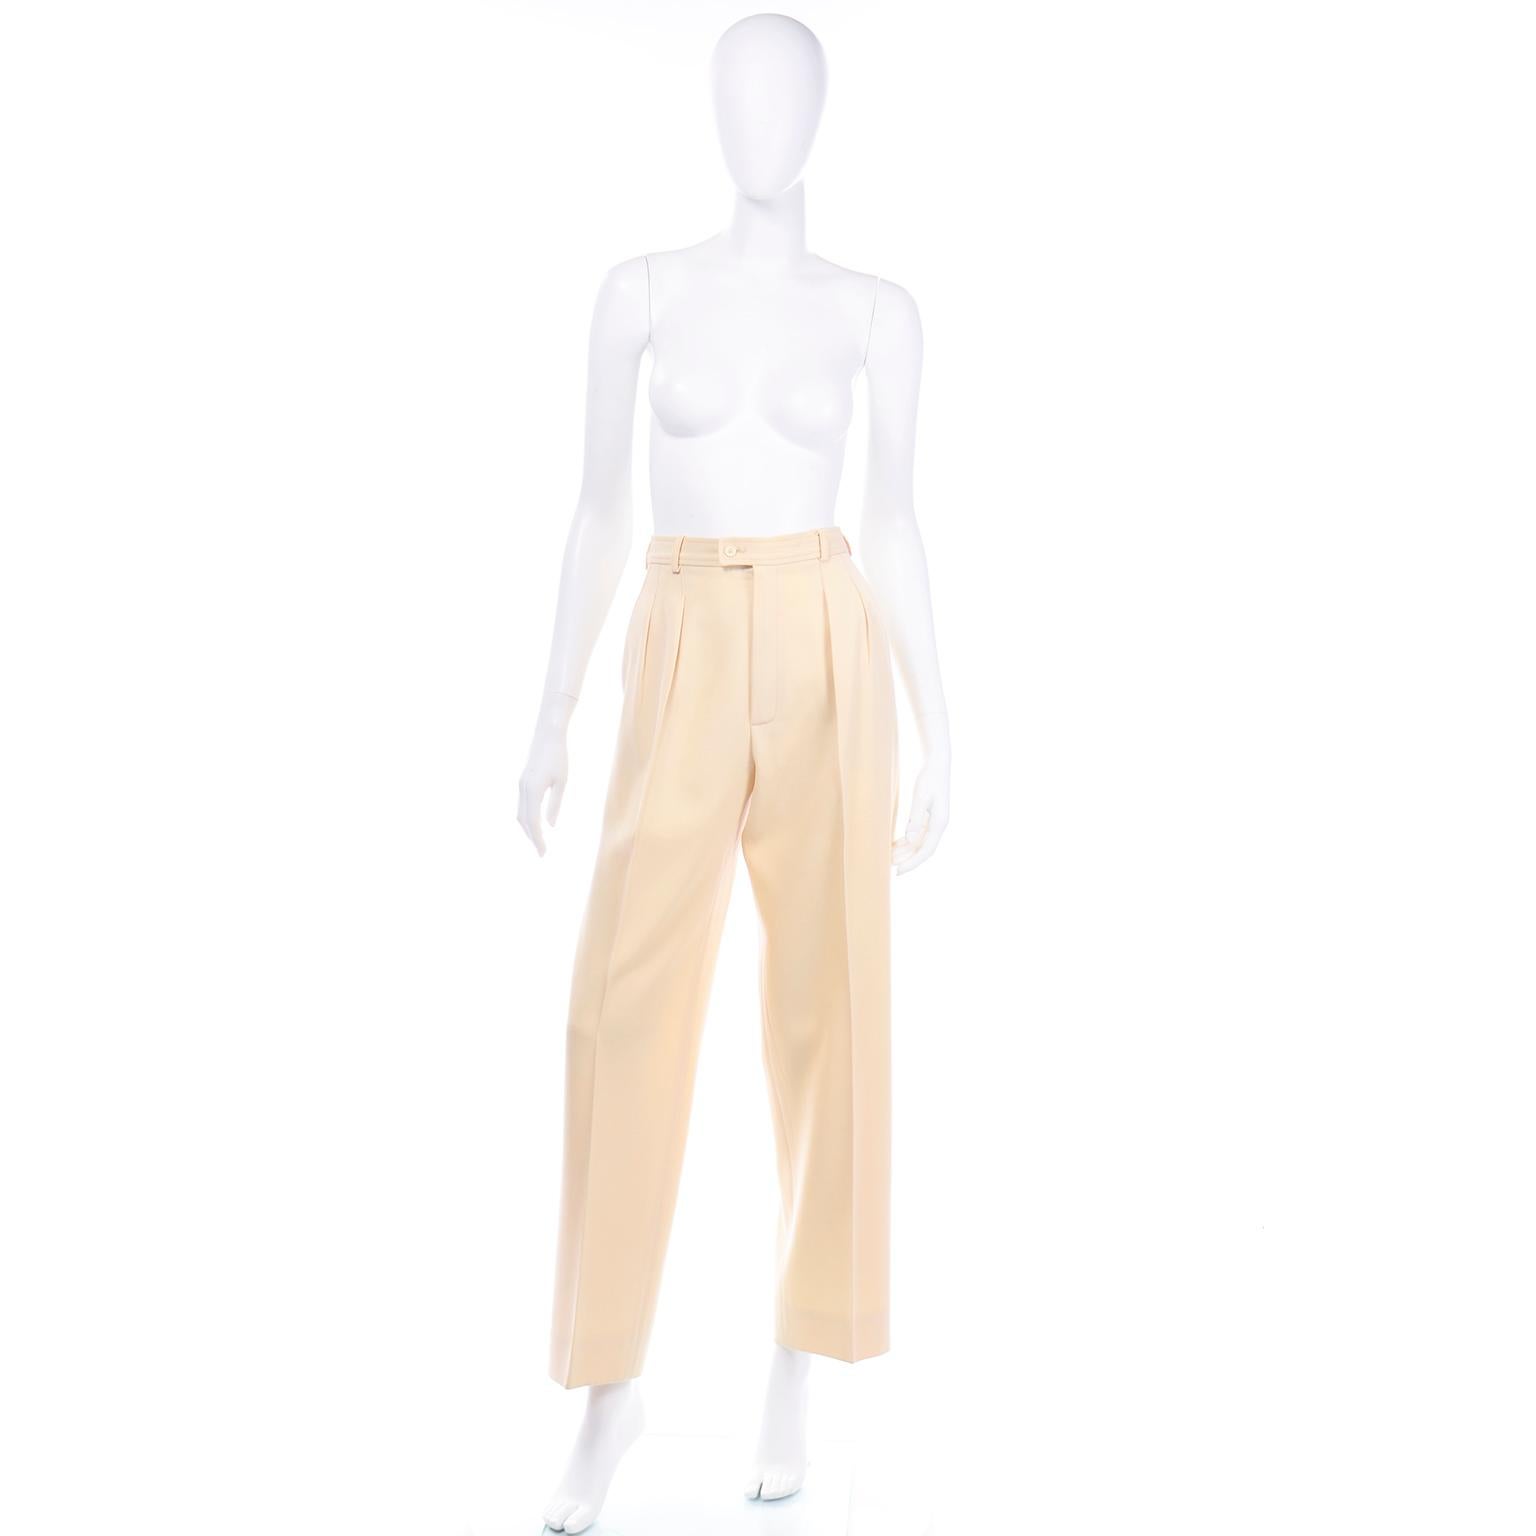 These vintage Yves Saint Laurent Rive Gauche cream pants are a spring staple! The color is a perfect neutral banana cream. These pants have a medium weight wool feel, so they will be great as a transitional piece from winter to spring. The front of